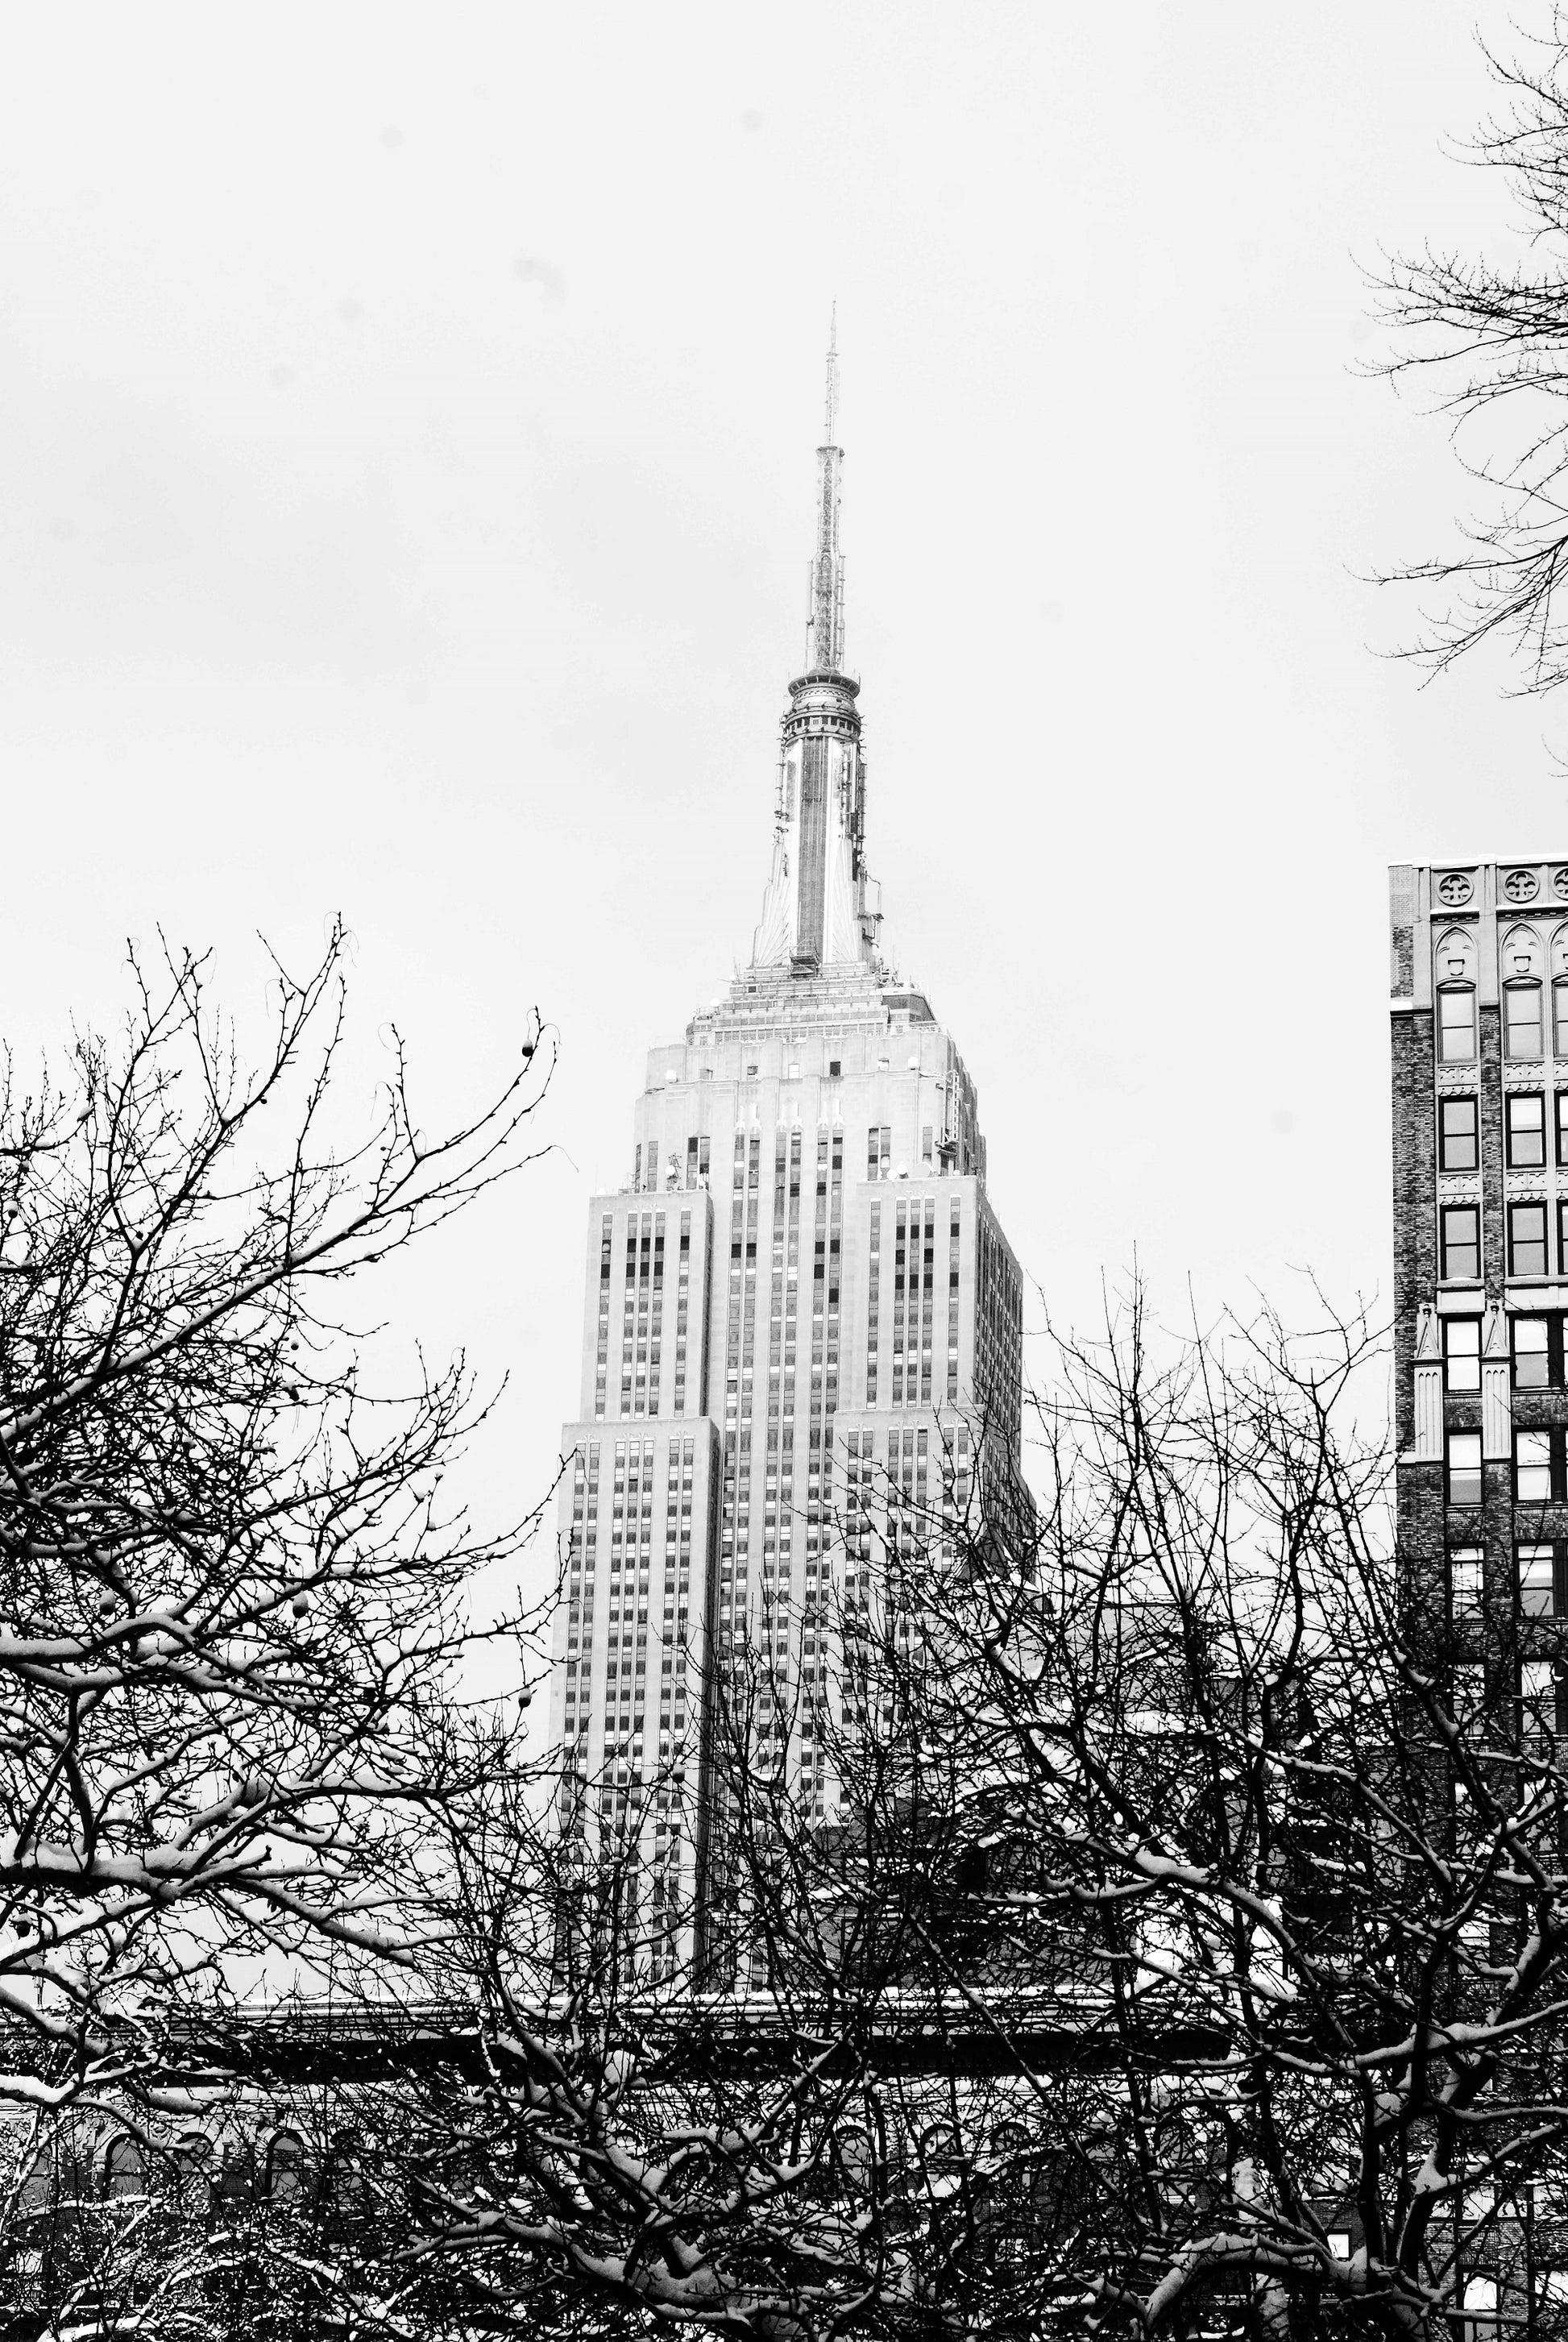 One of the most enduring landmarks of New York City, the iconic Empire State Building